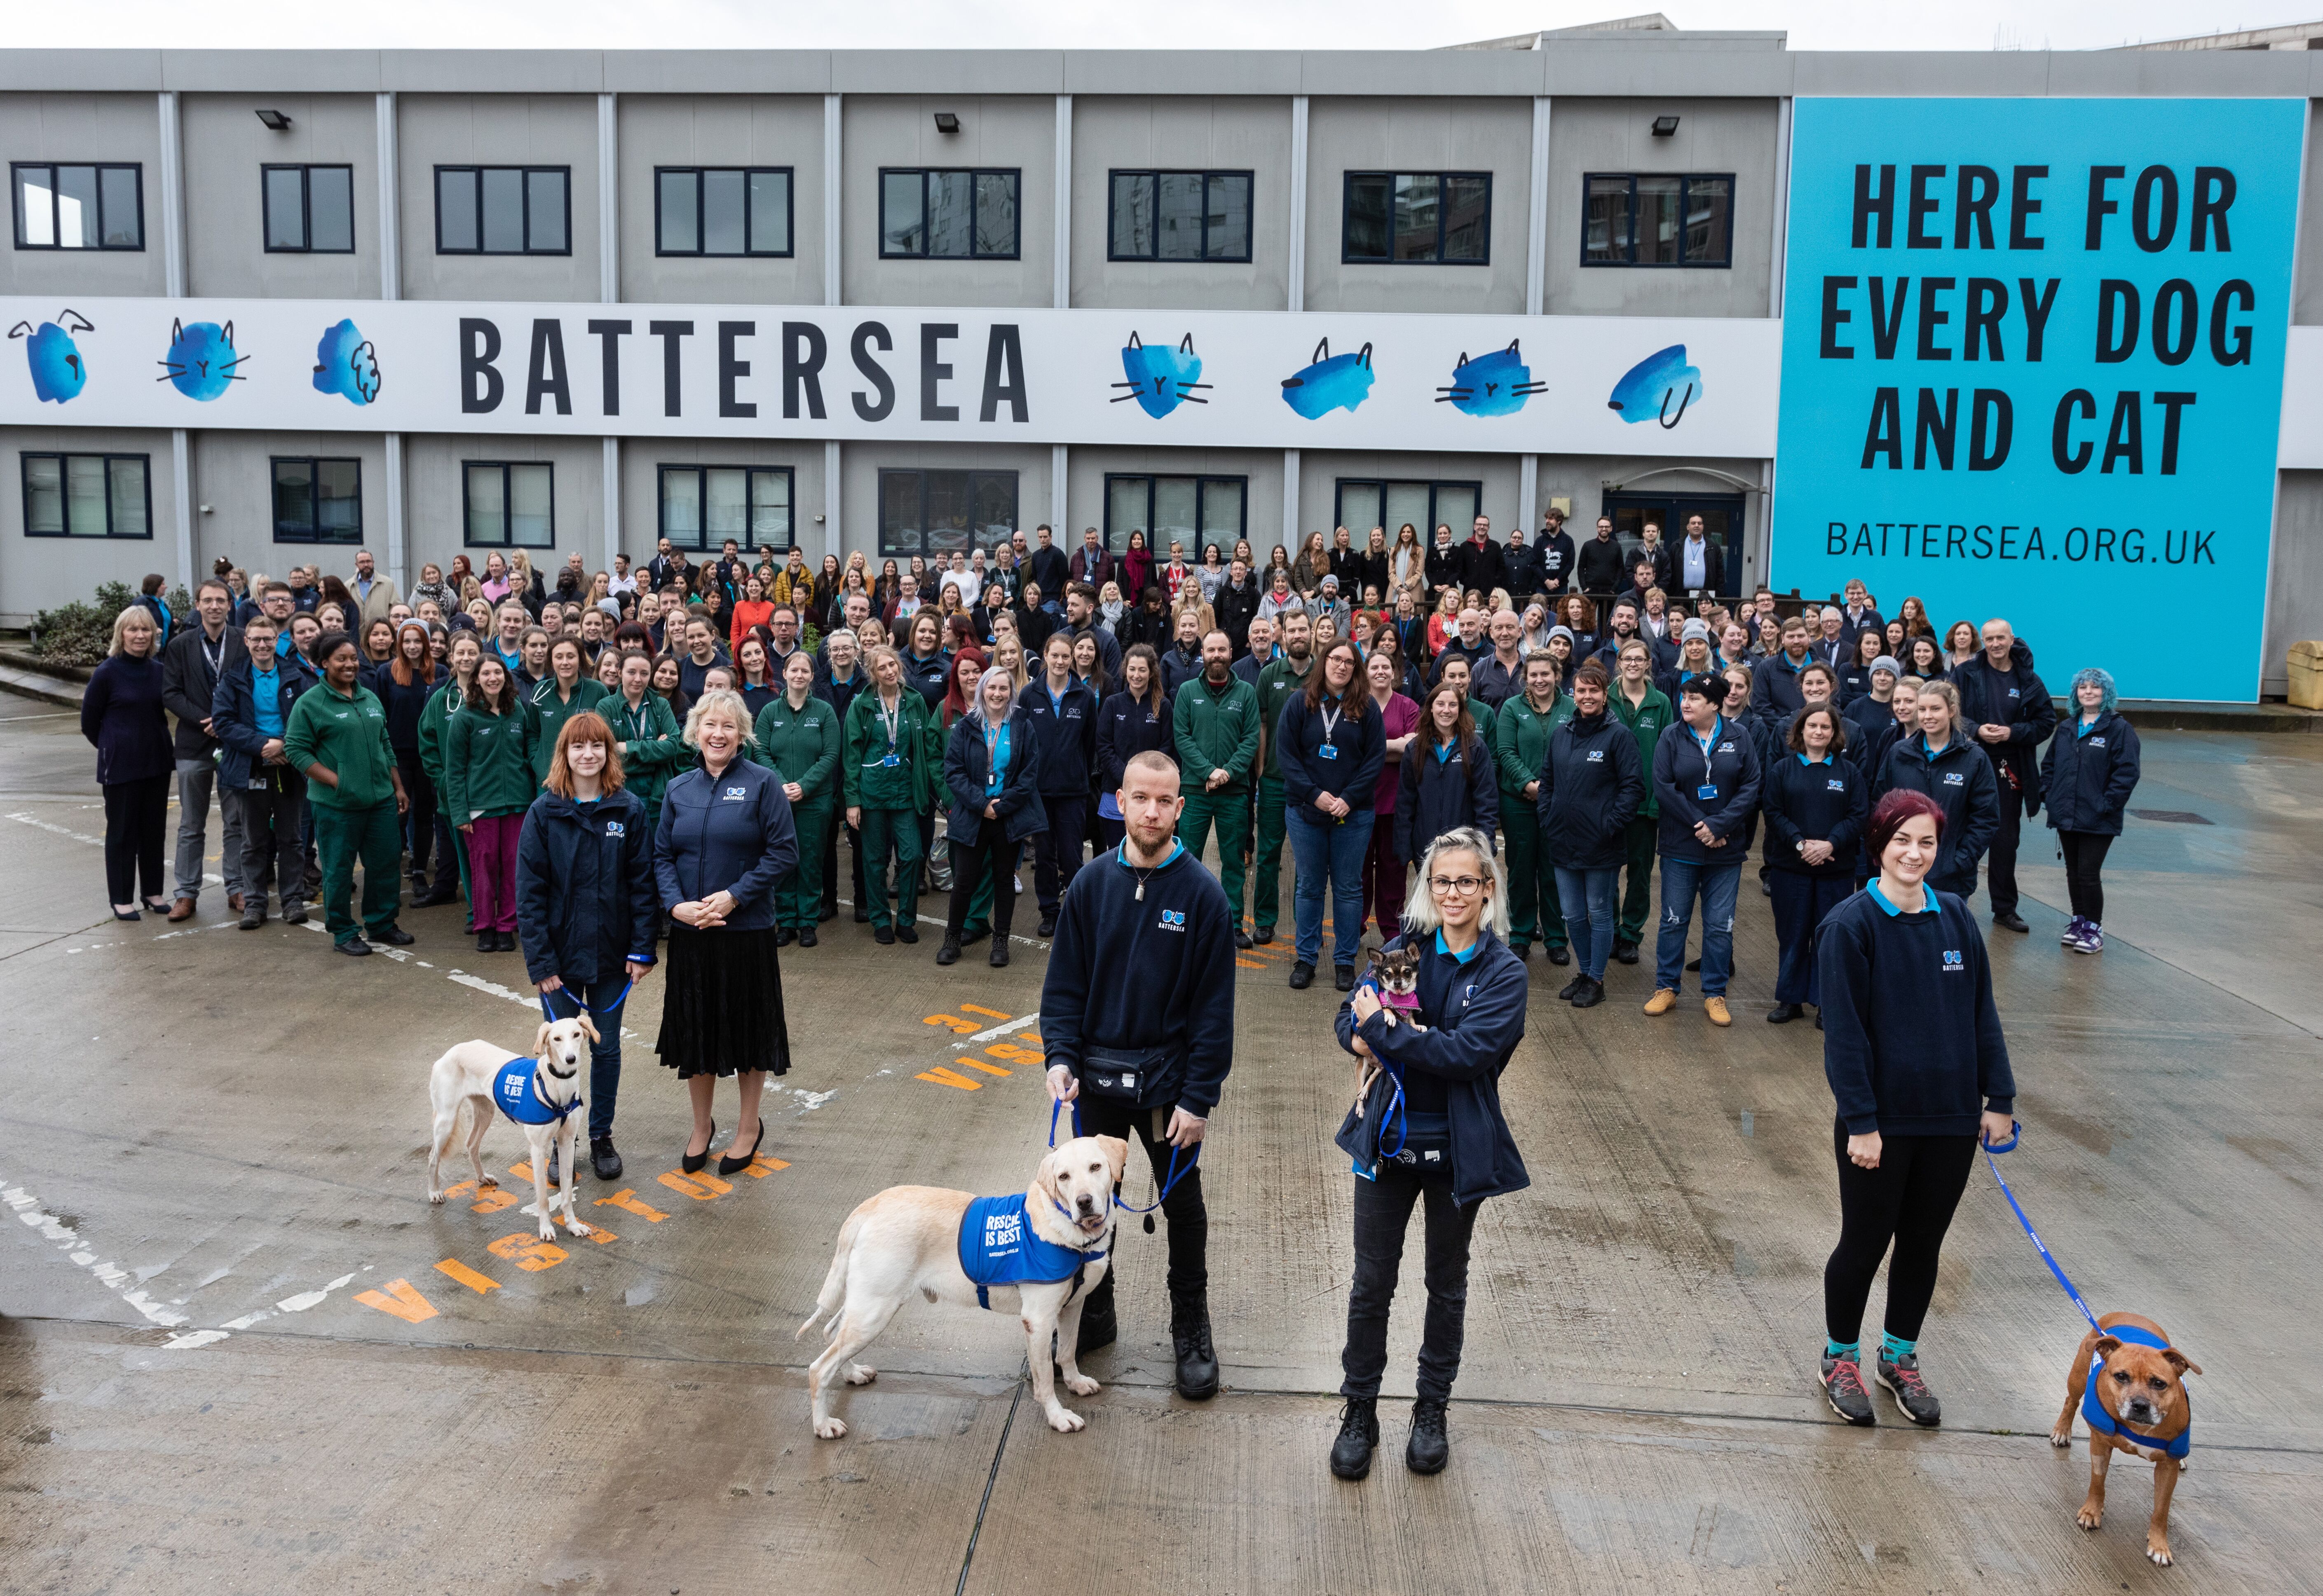 battersea cats and dogs